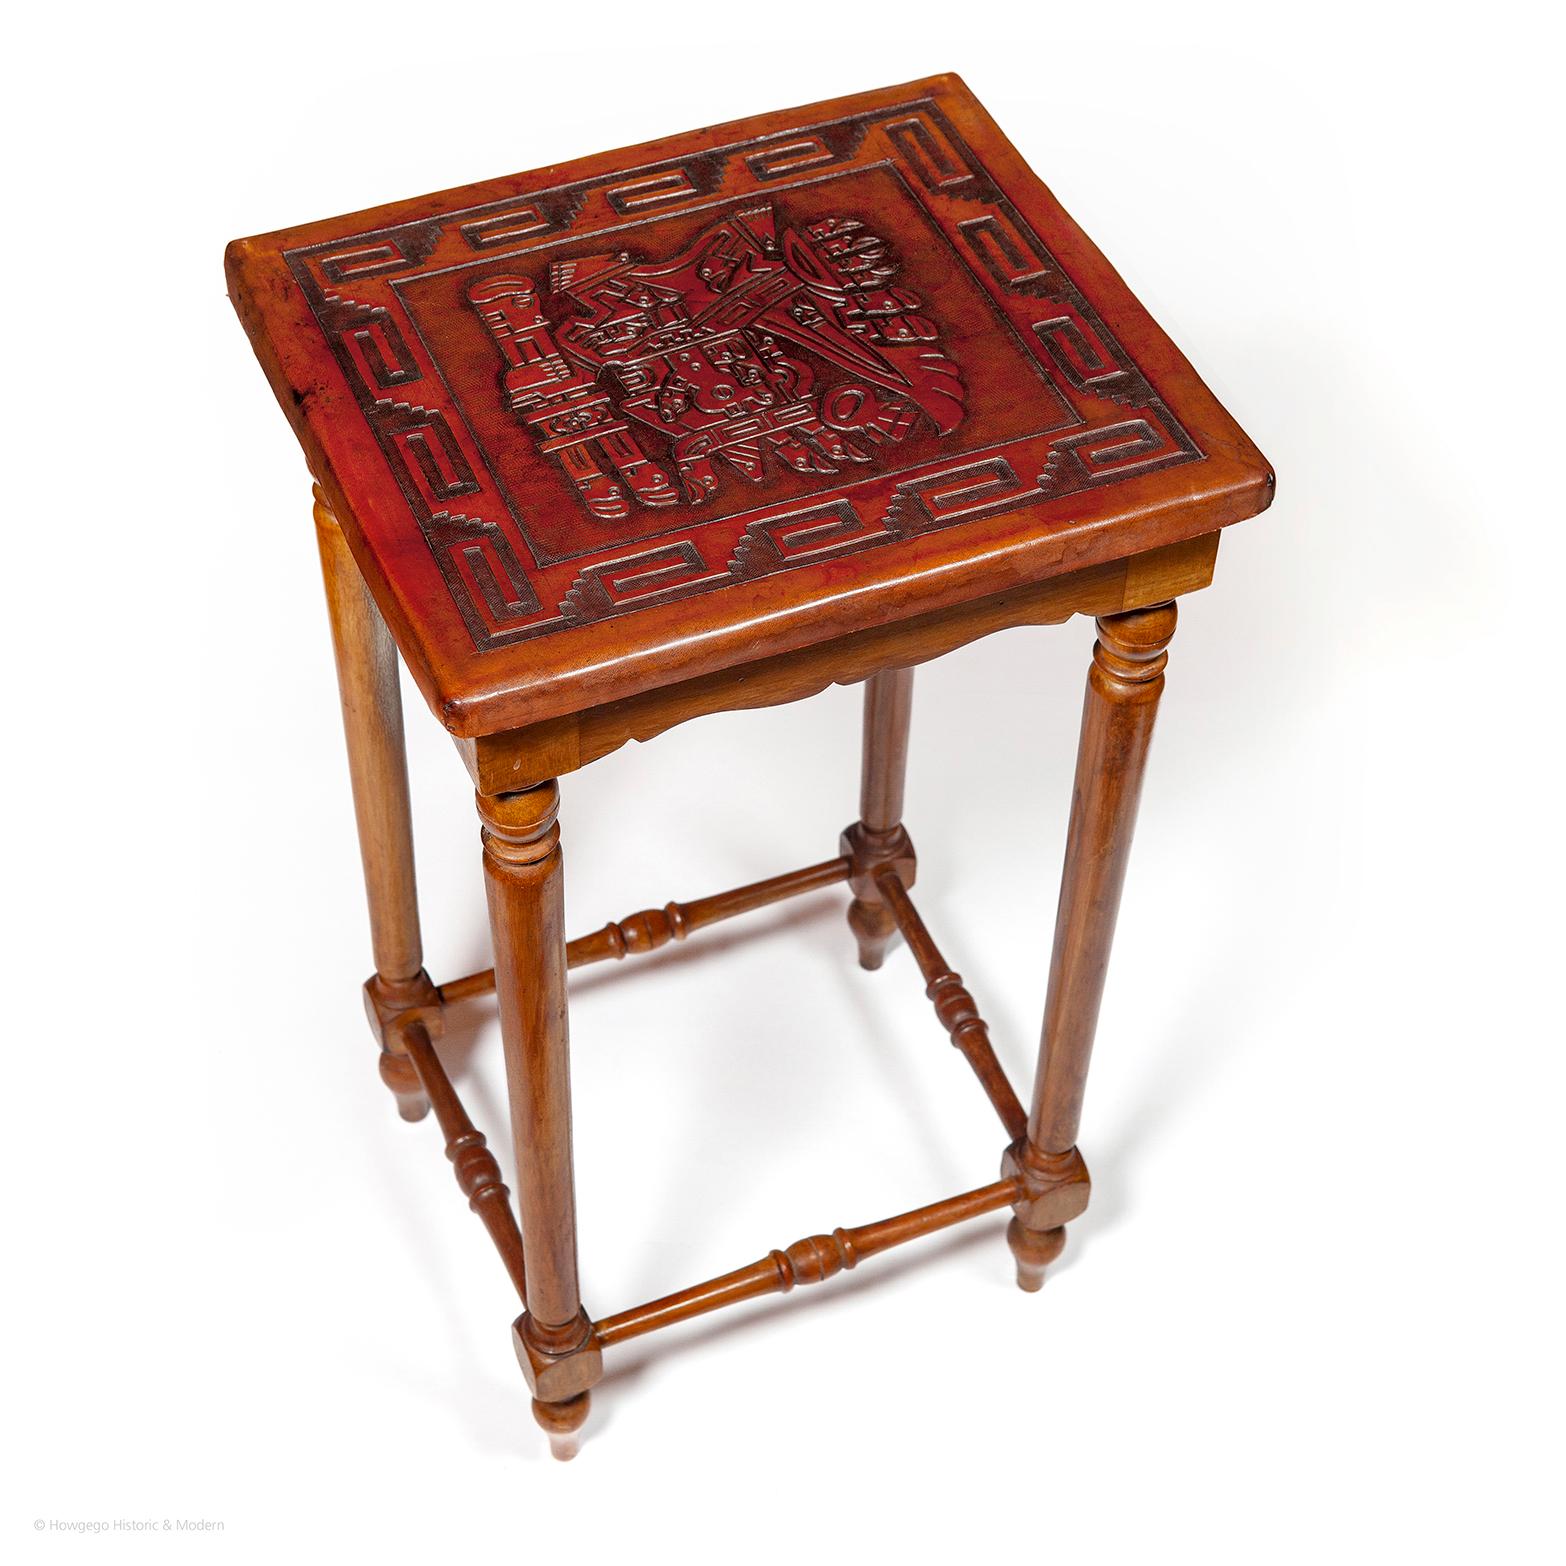 Peruvian Nest 3 Sidetable Low Tables Leather Brown Peru Vintage Aztec Embossed Spanish